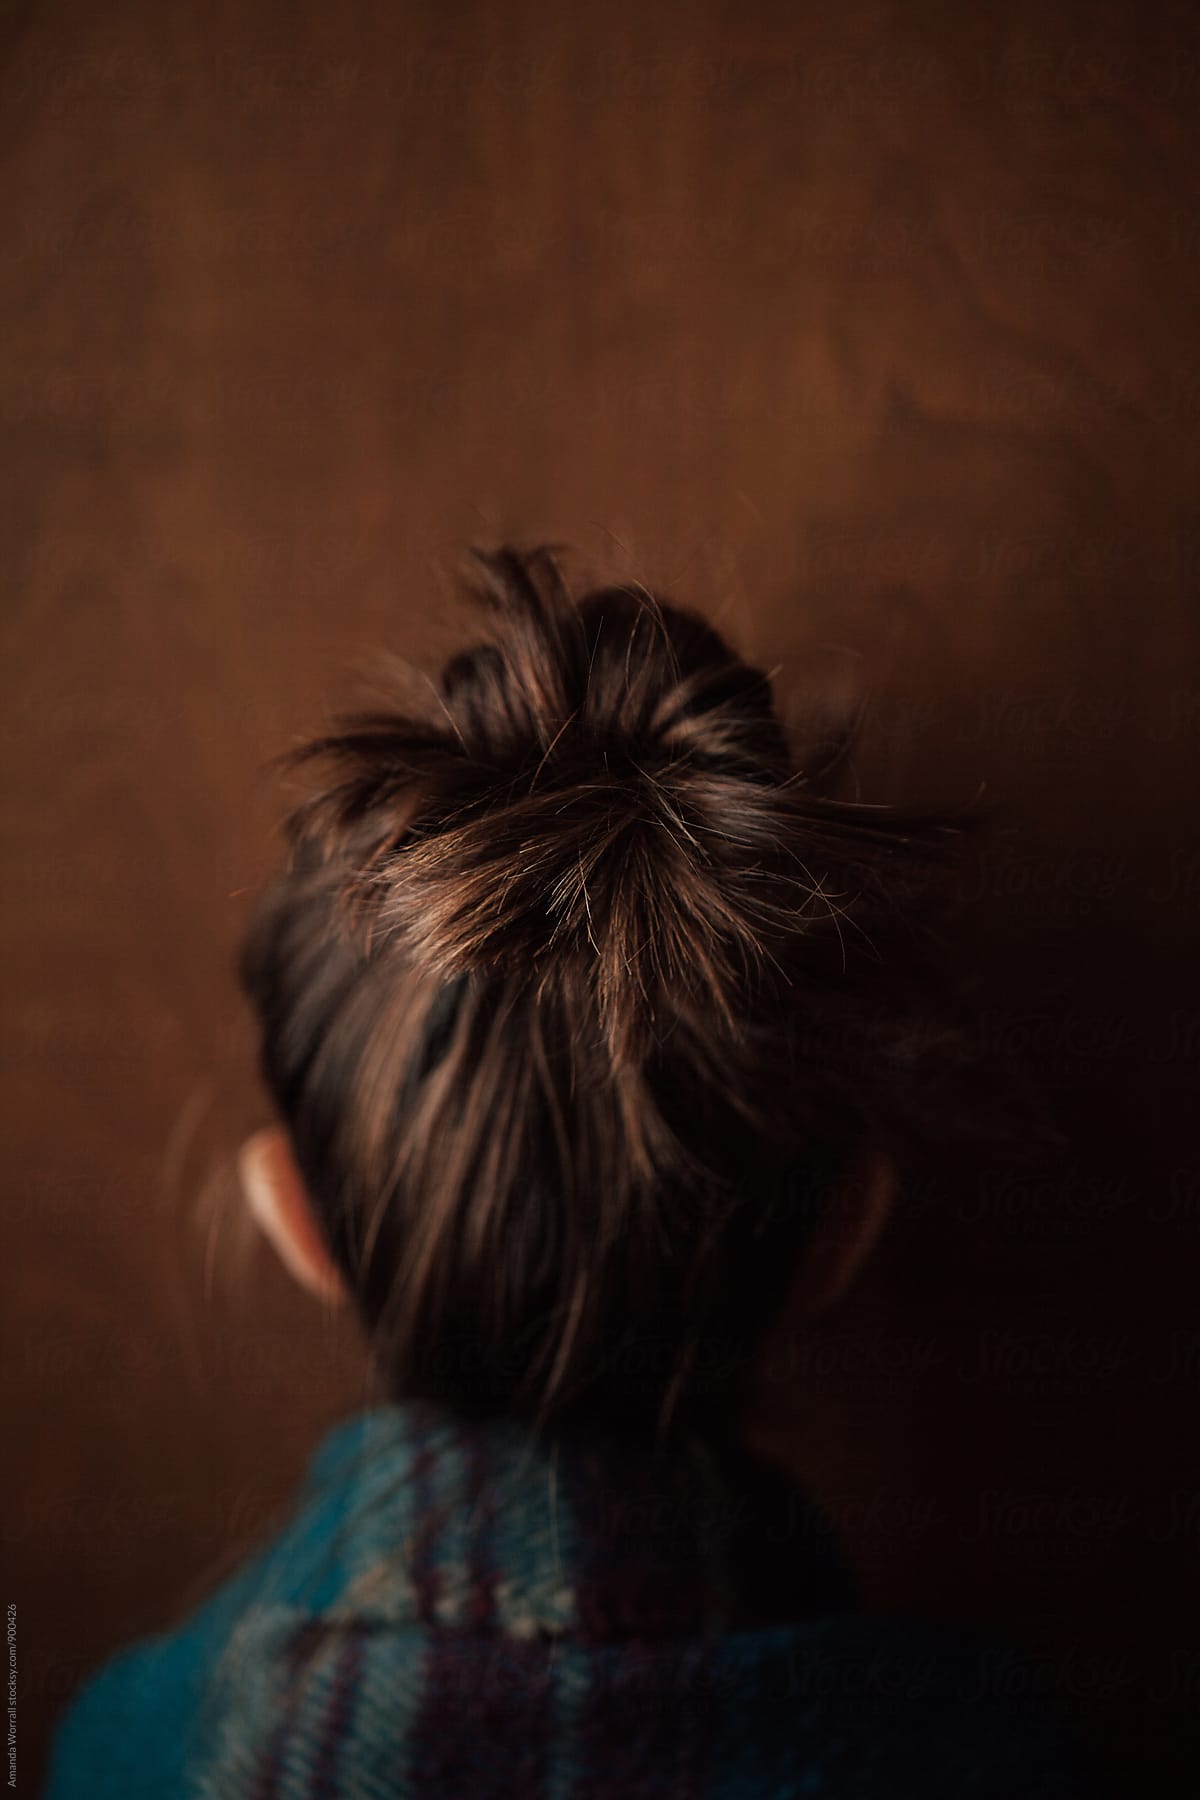 Back view of little girl with hair in a messy bun